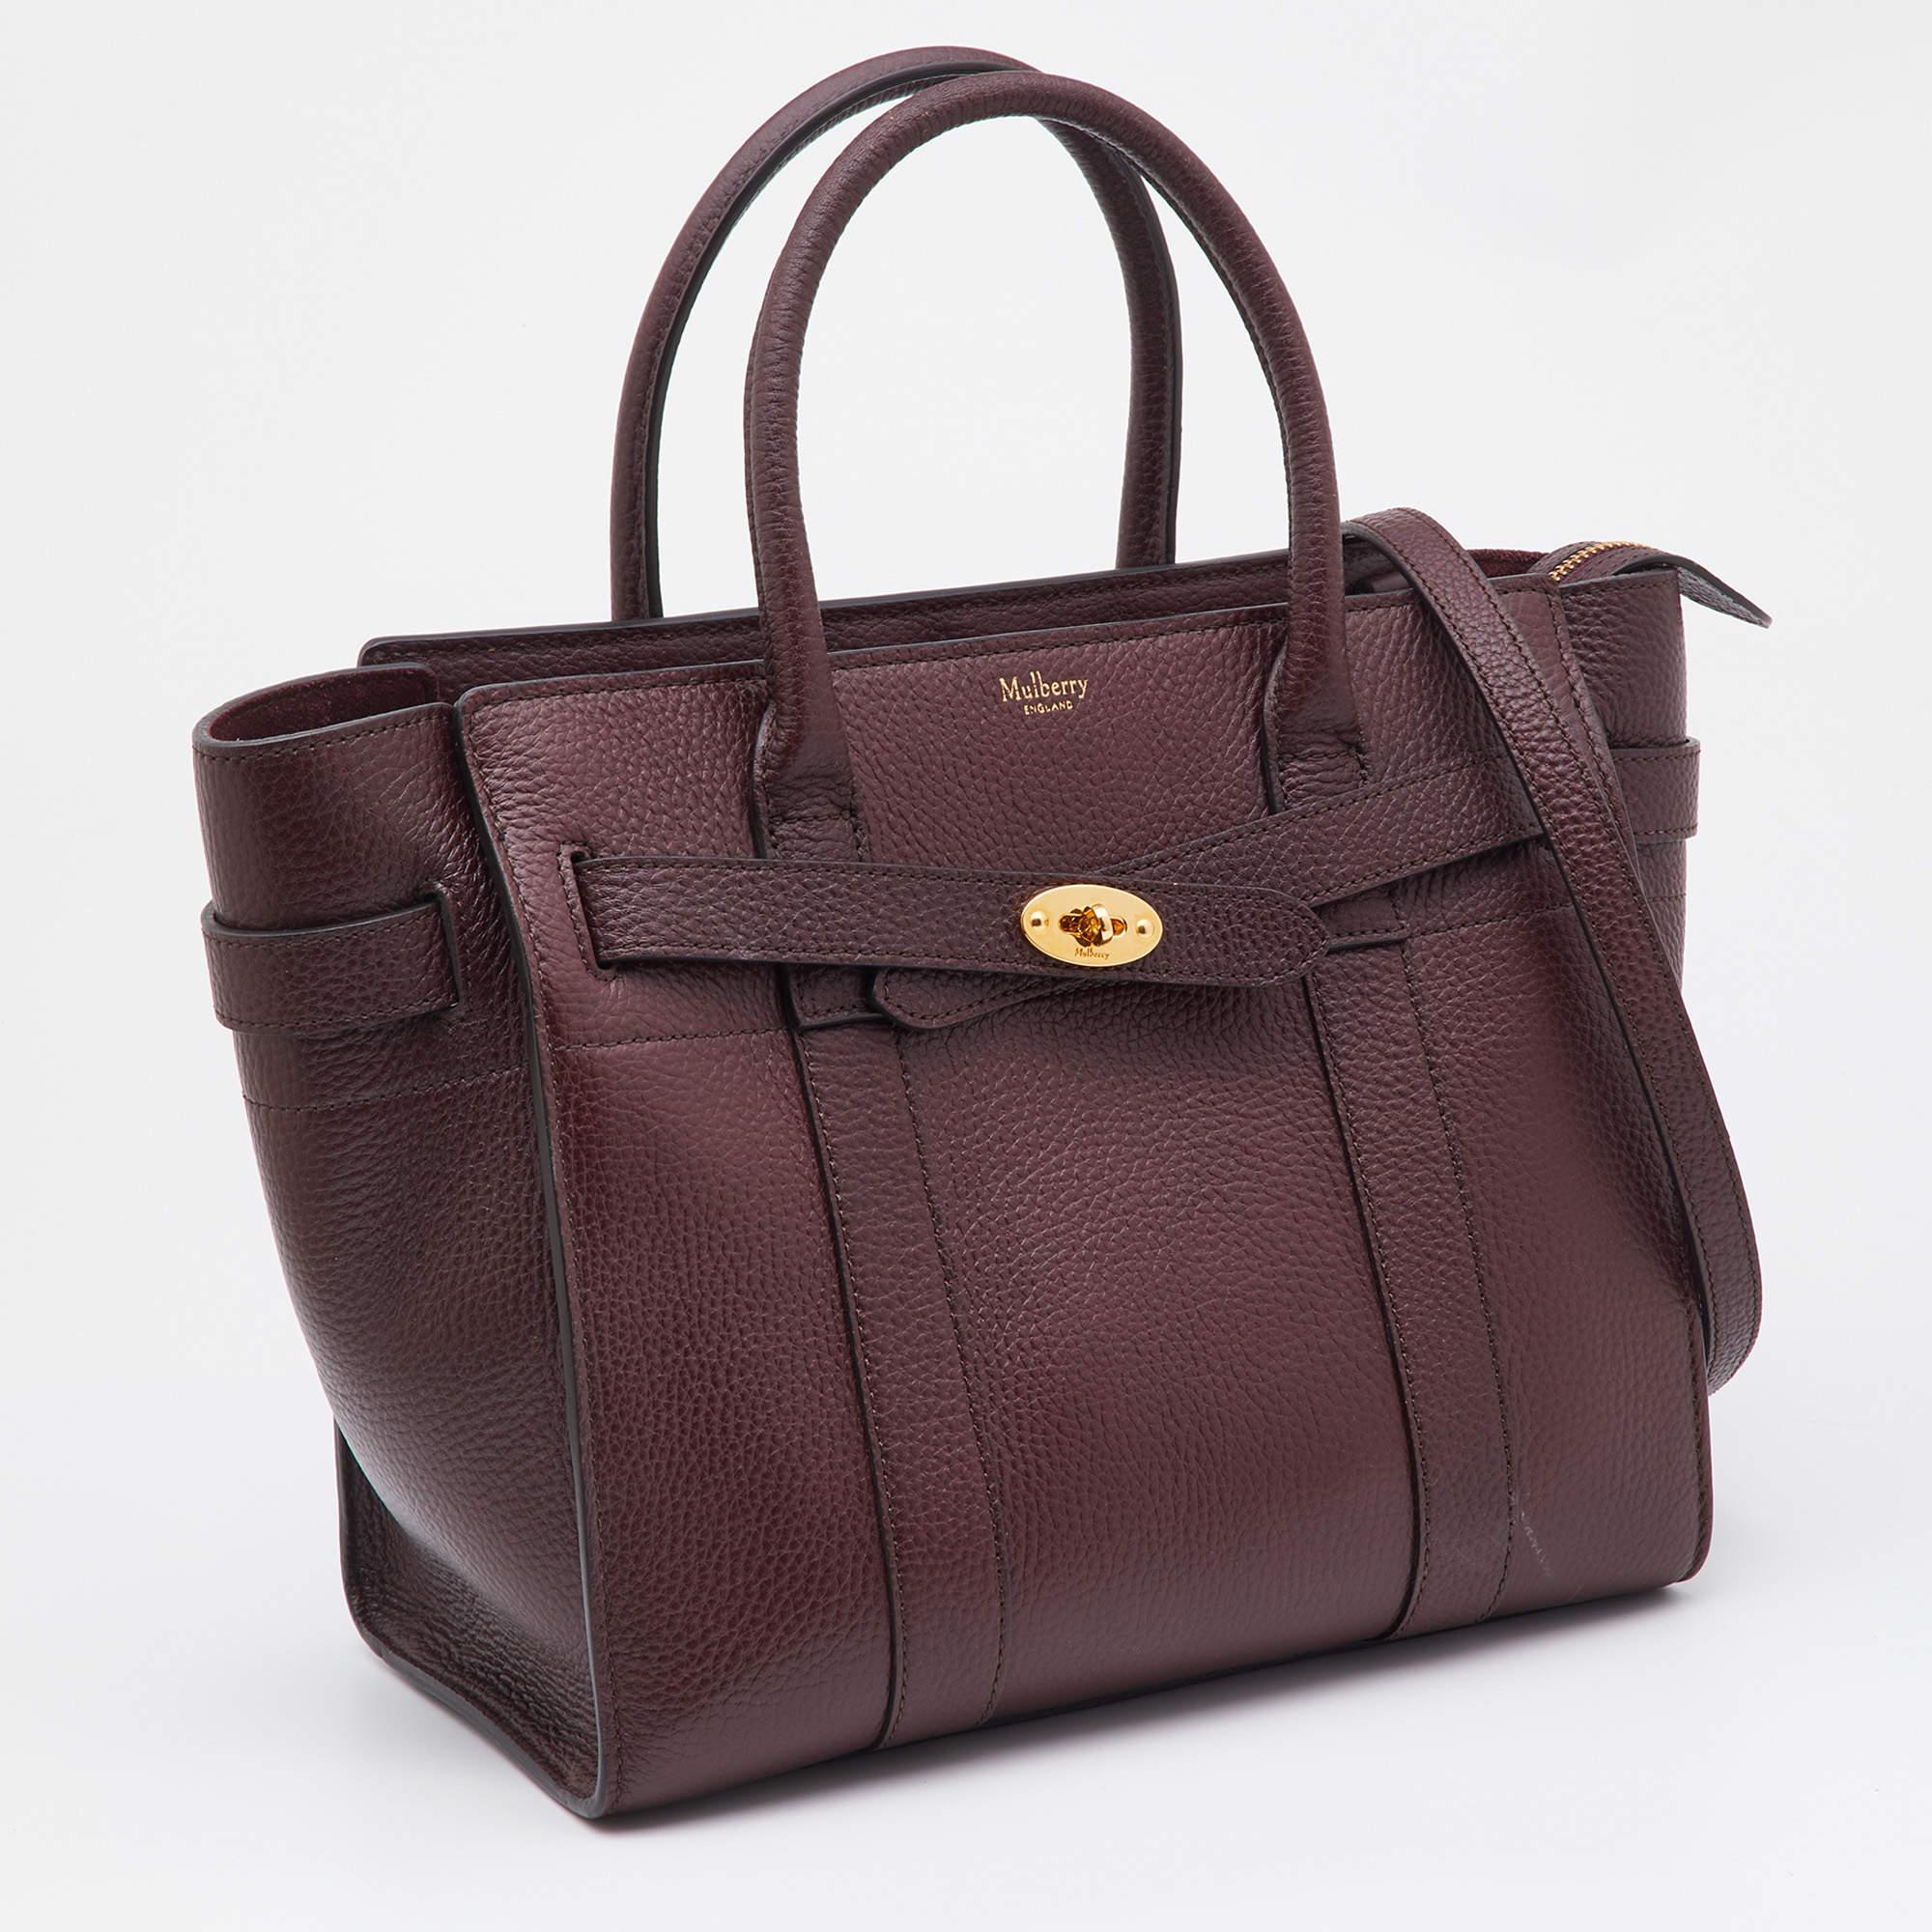 Women's Mulberry Oxbood Grained Leather Small Zipped Bayswater Tote